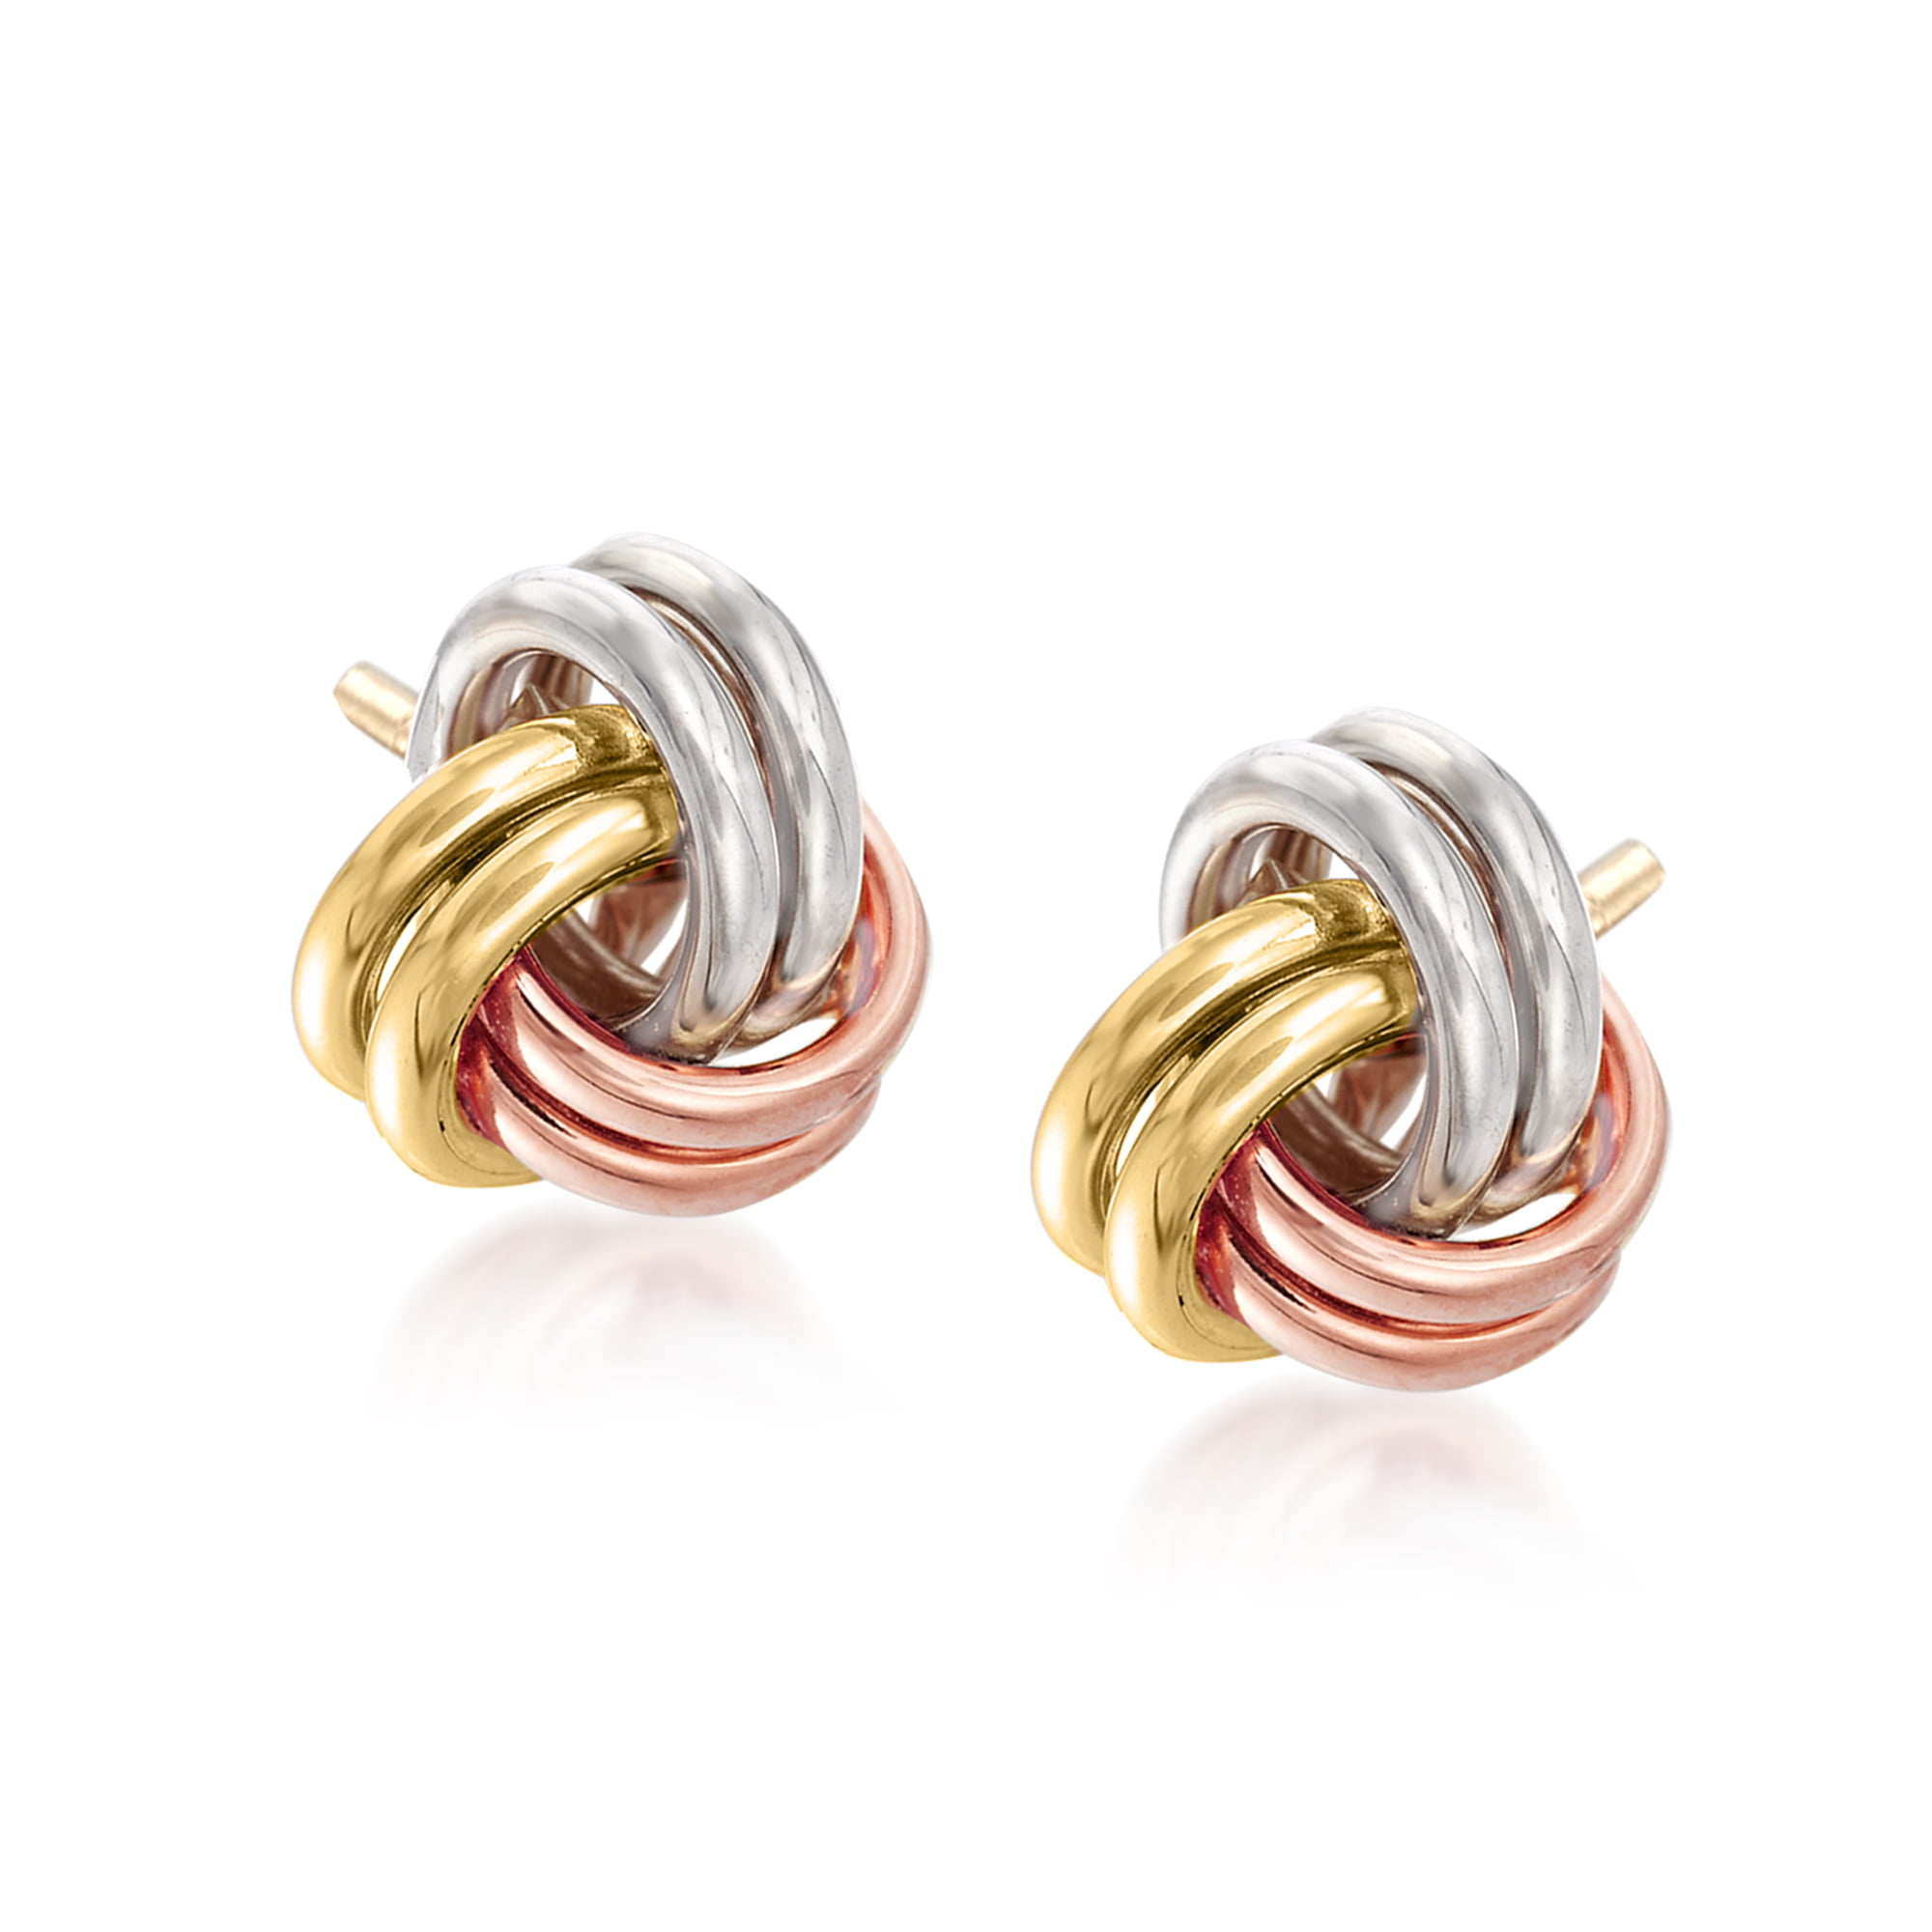 14K Tricolor High Polish Gold Love Knot Stud Earrings 9mm Made in ITALY